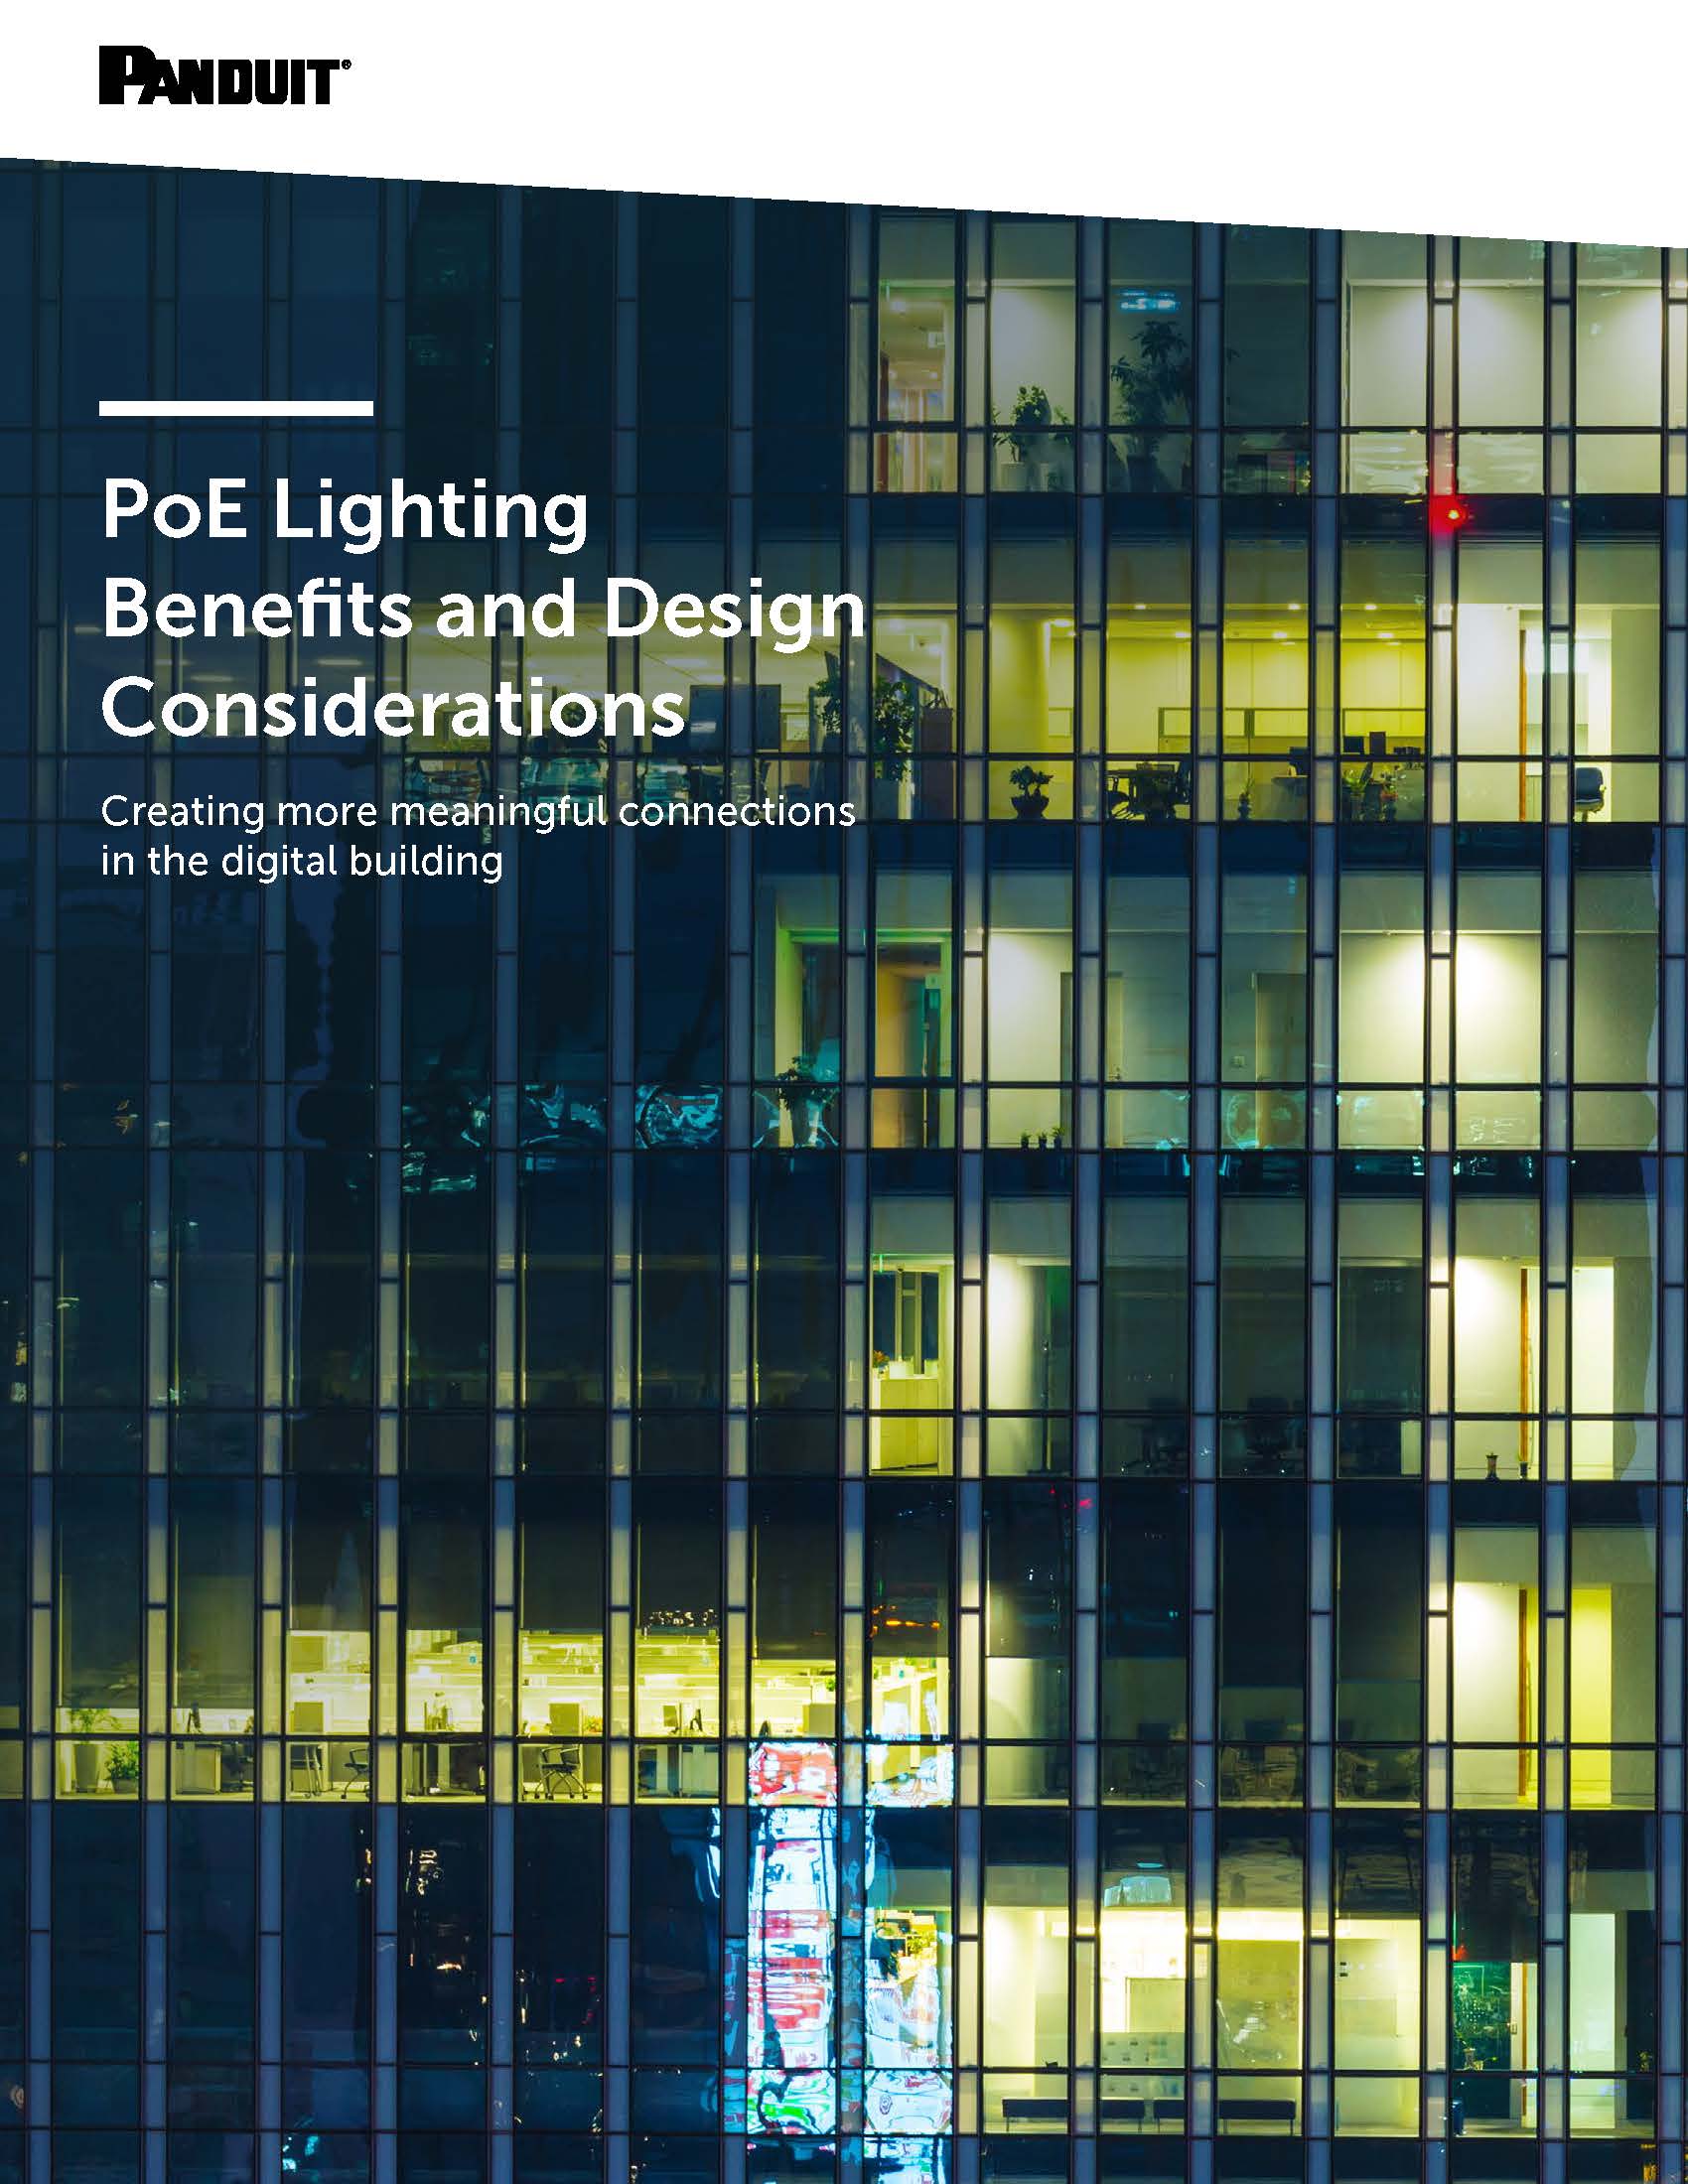 PoE Lighting Benefits and Design Considerations Paper